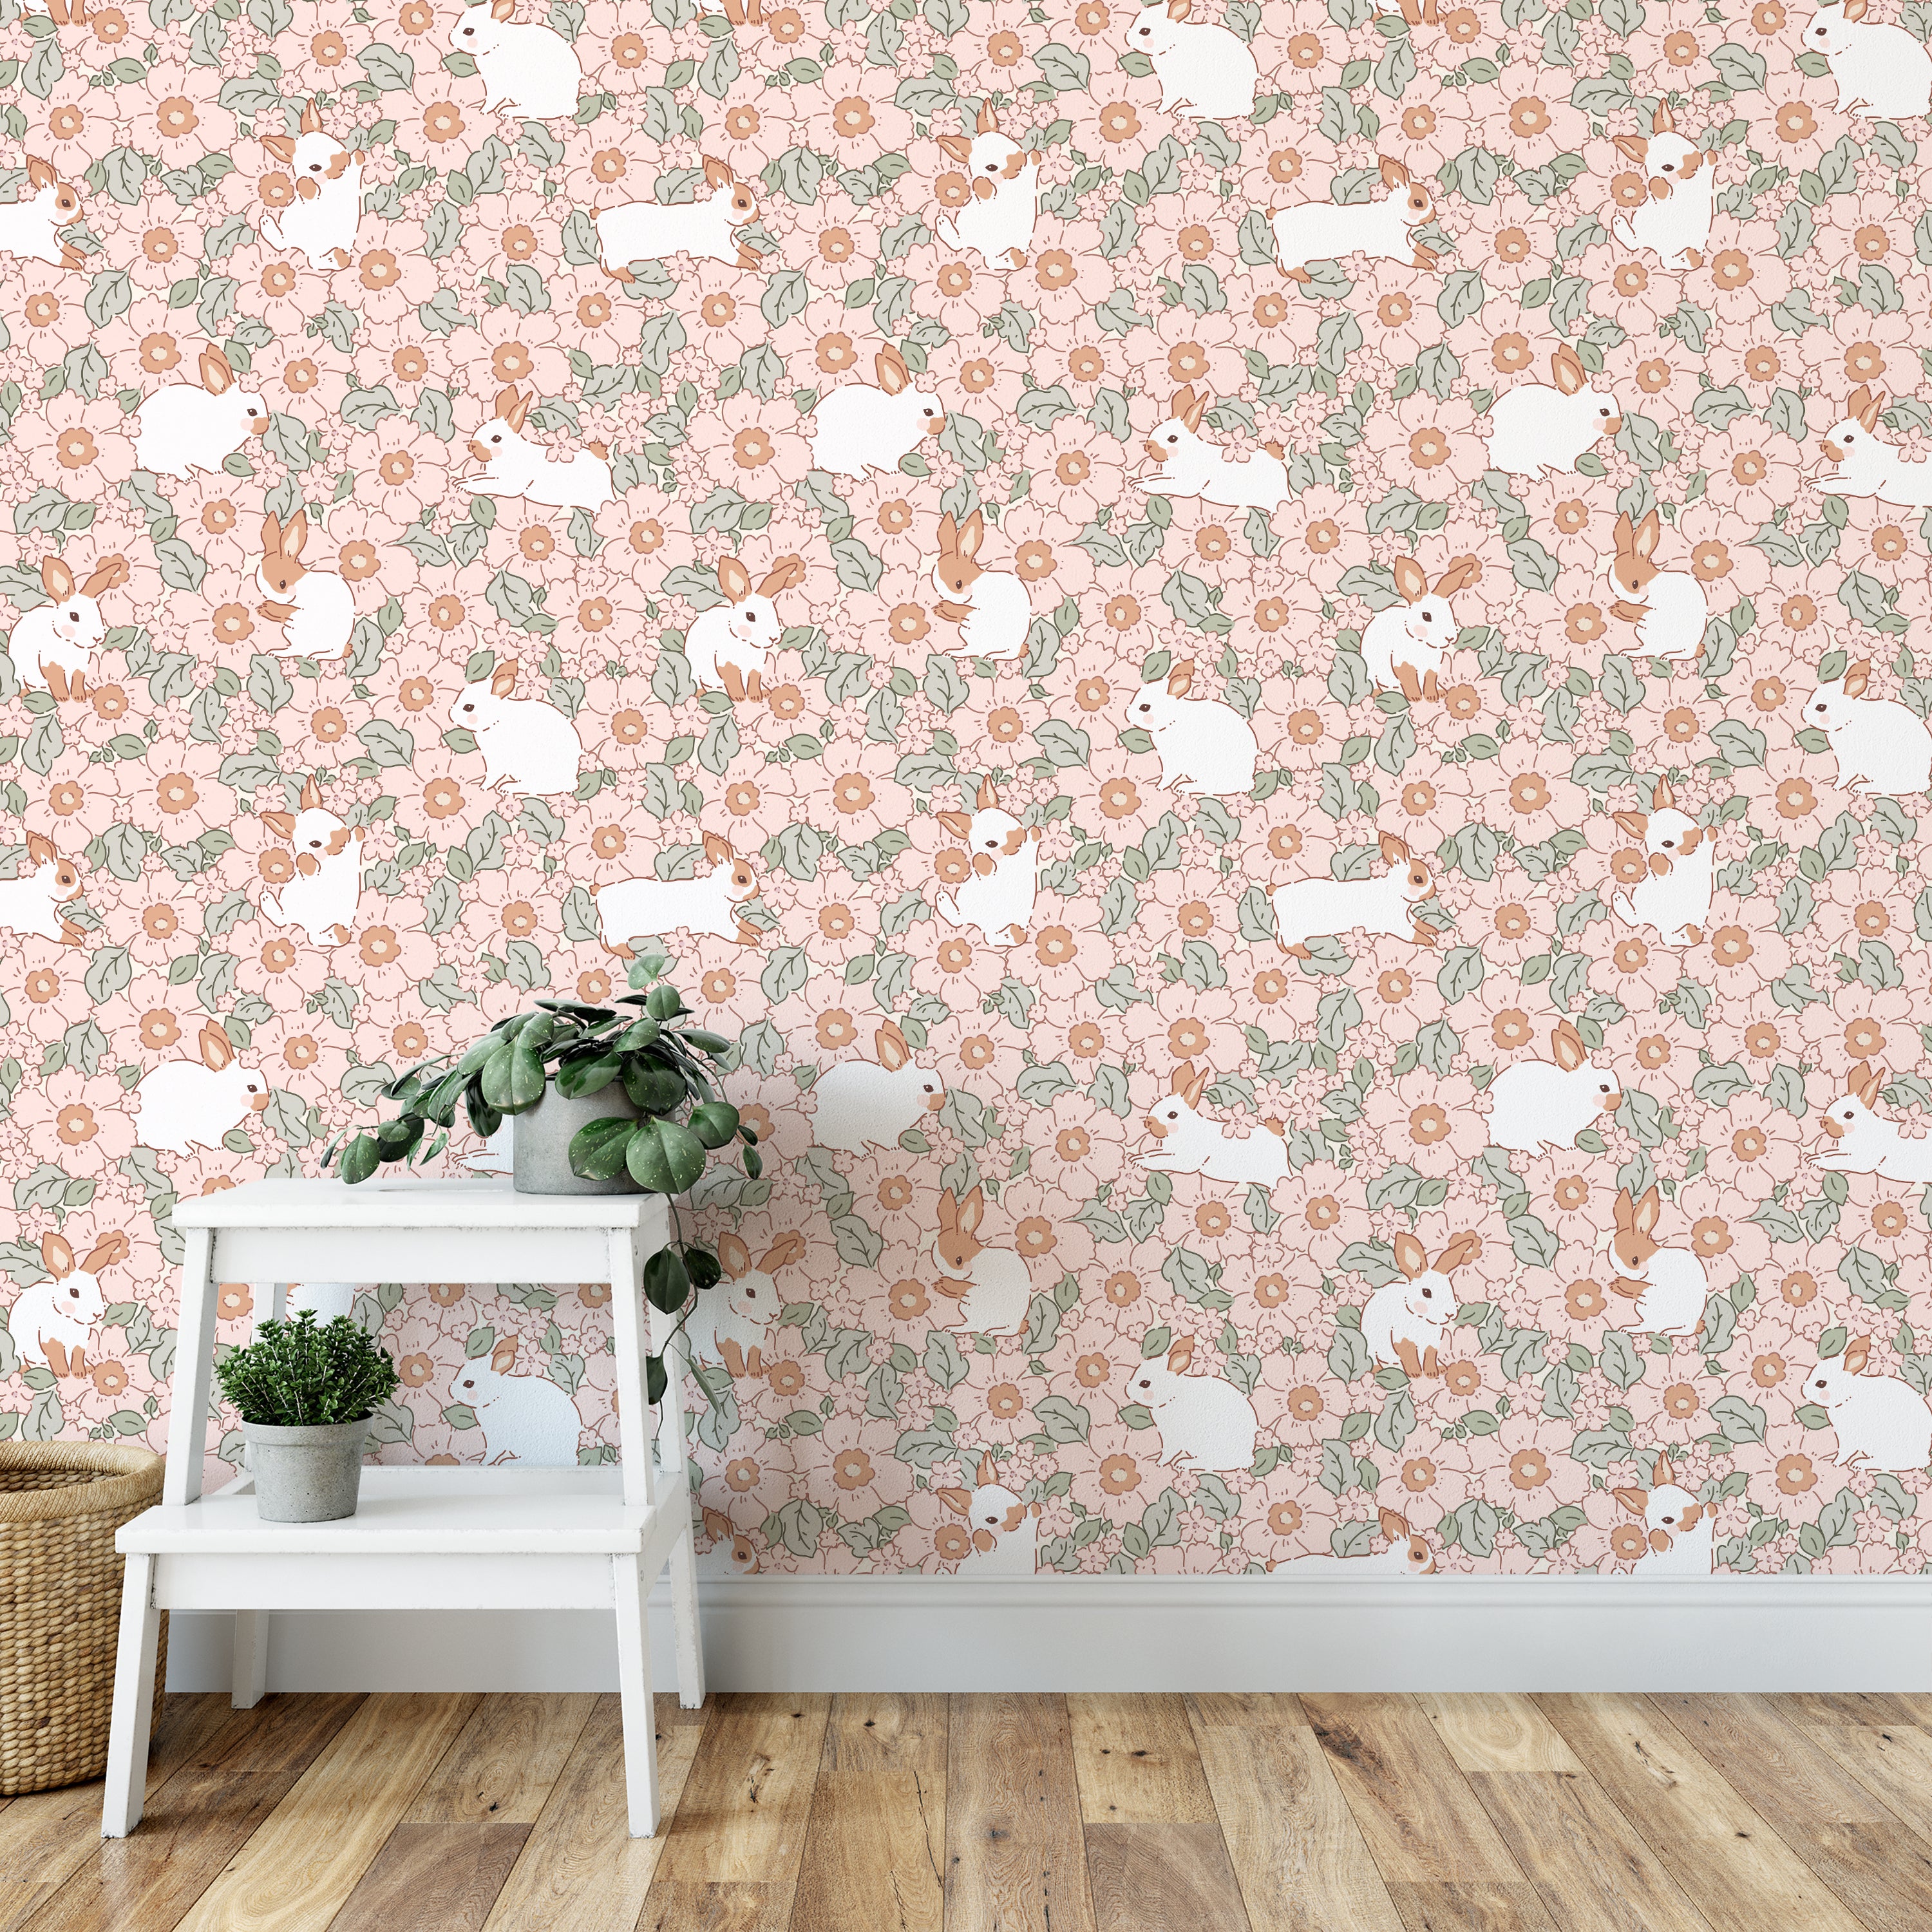 This image captures a serene corner of a room decorated with the Petite Lapinou Wallpaper, featuring playful white rabbits interspersed among soft pink flowers and lush greenery. The setting includes a simple white plant stand with green plants, complementing the soft and inviting nature of the wallpaper.